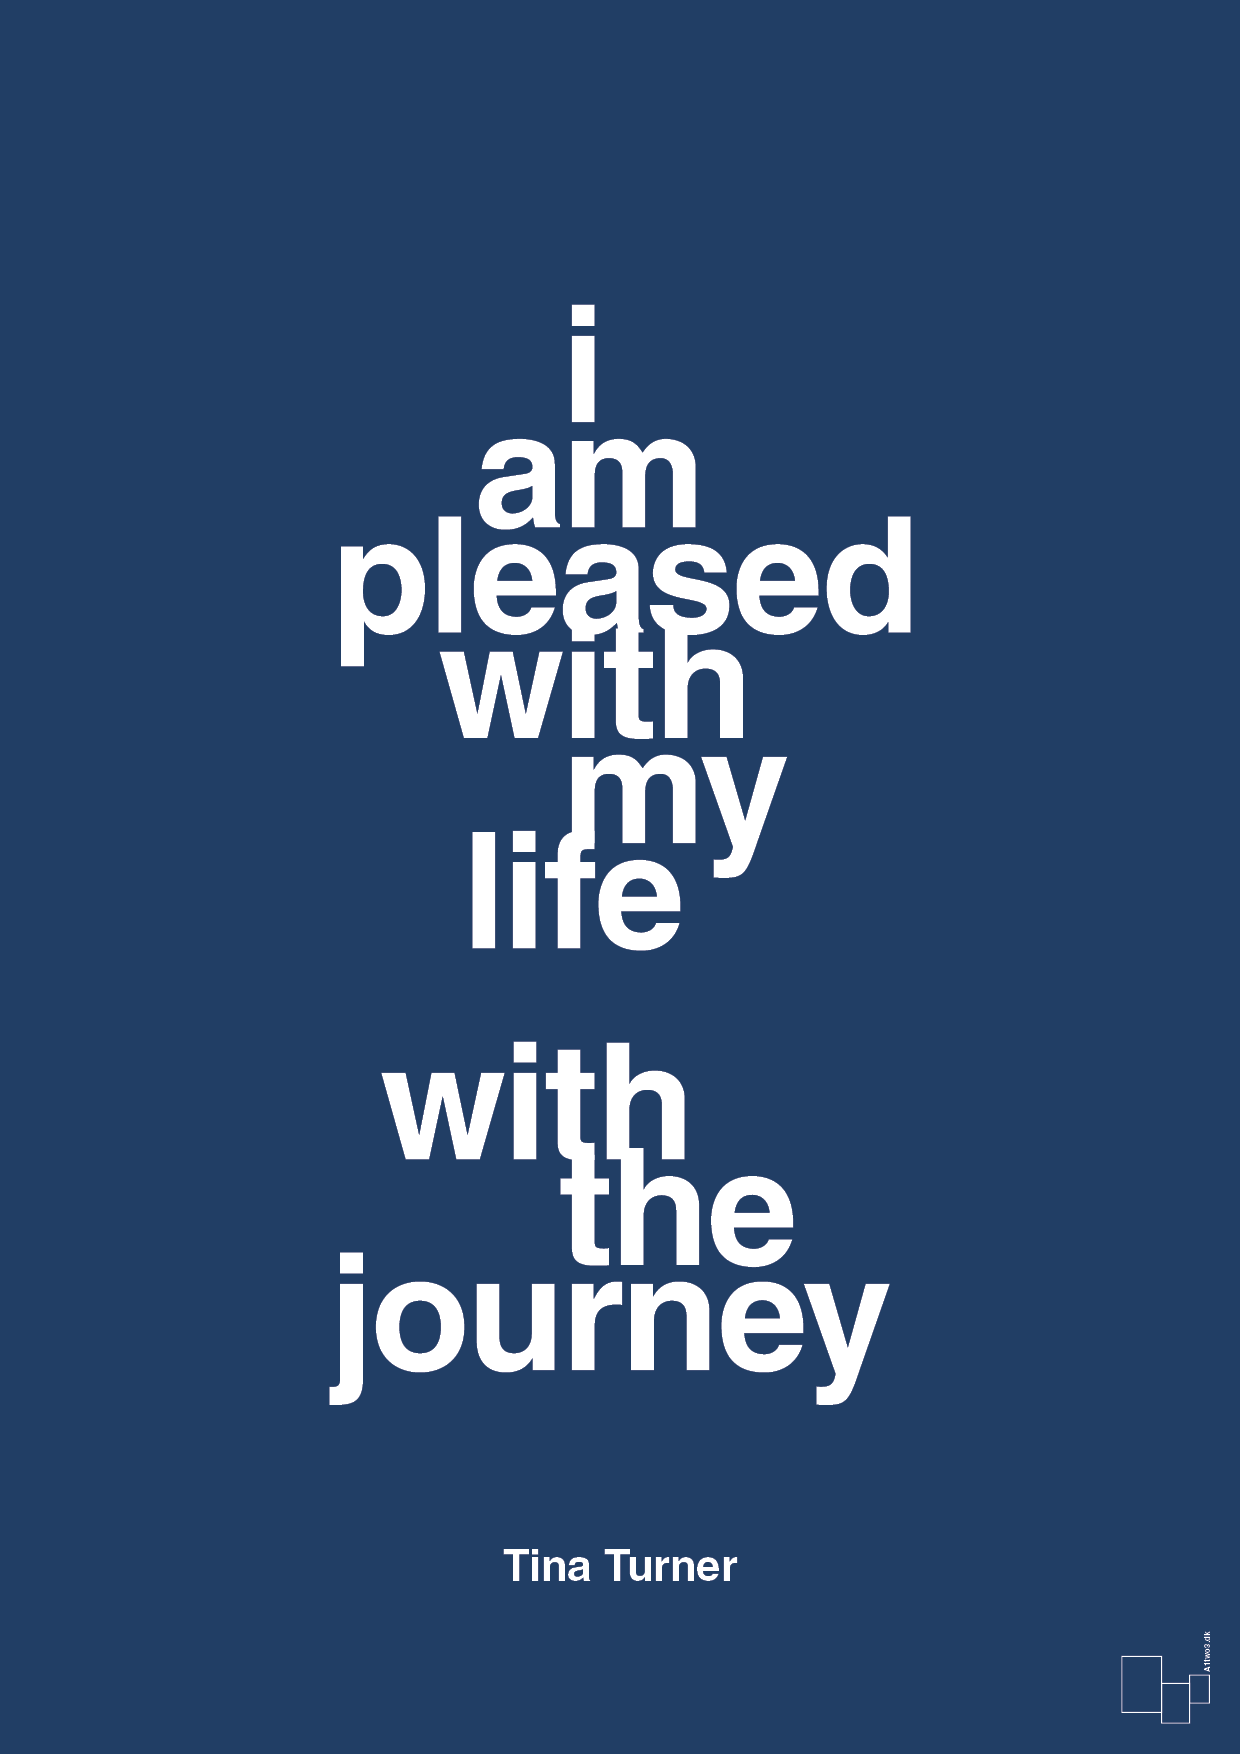 i am pleased with my life with the journey - Plakat med Citater i Lapis Blue